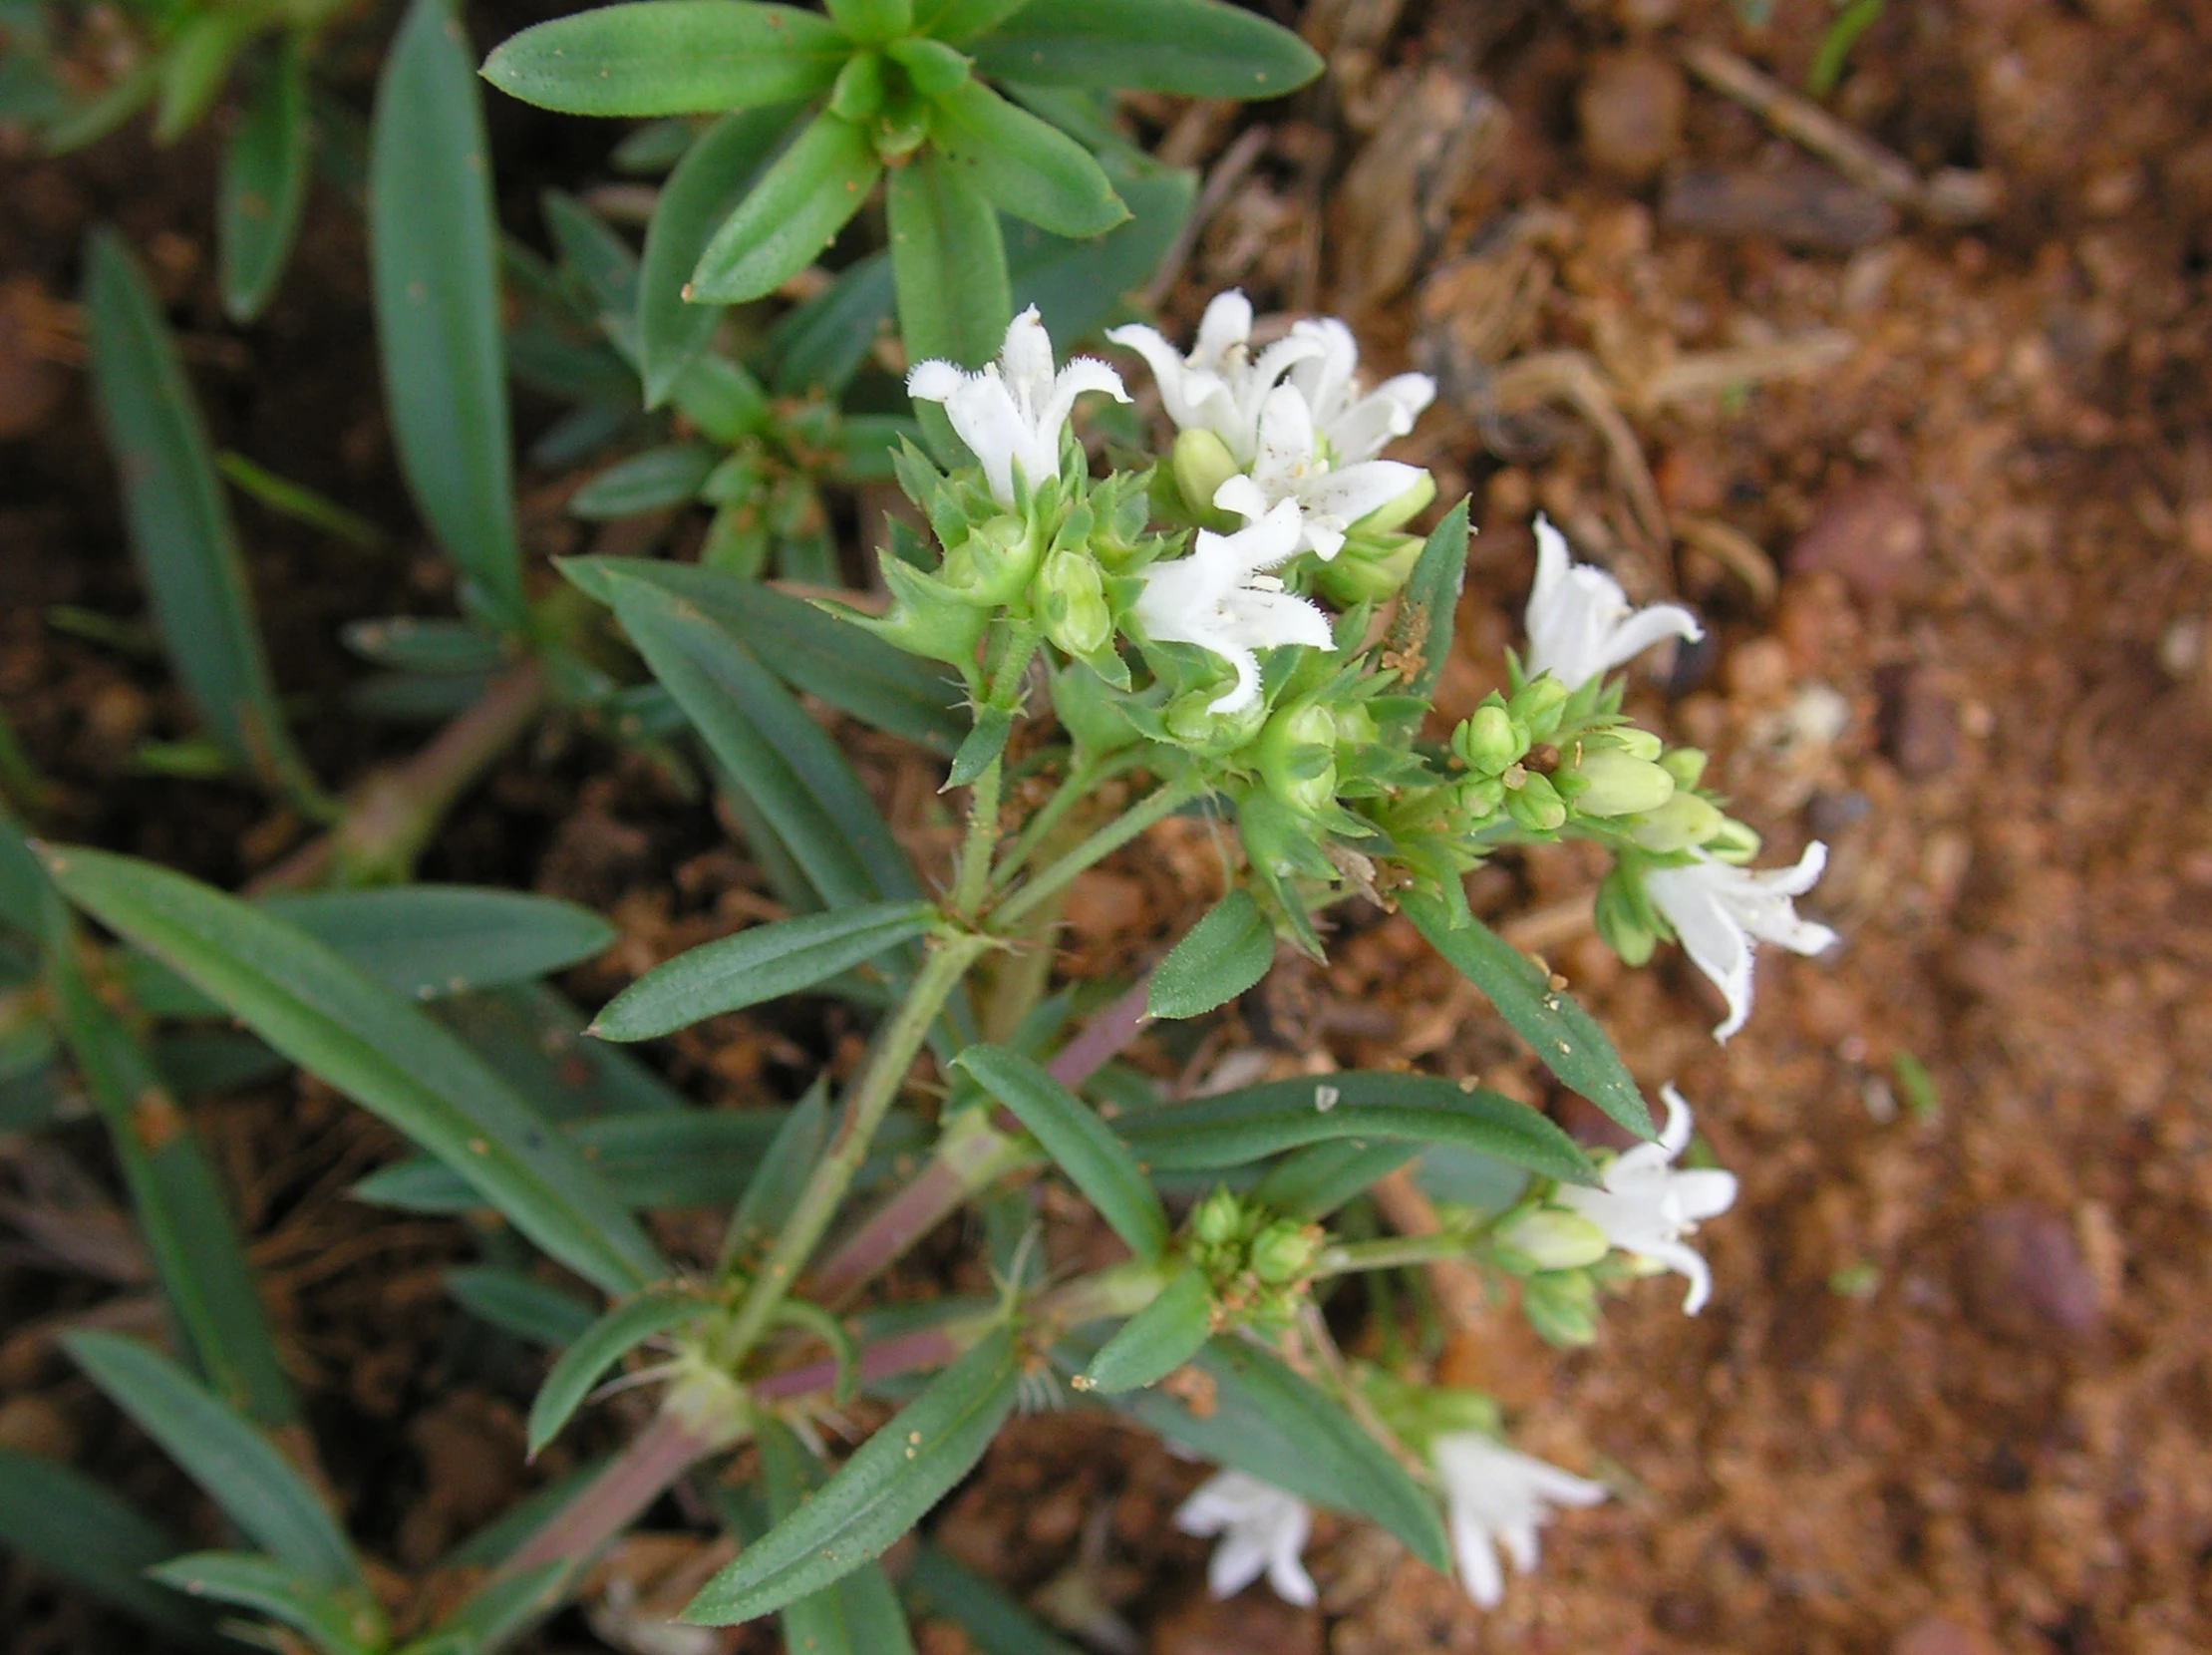 white flower clusters with green leaves on the ground